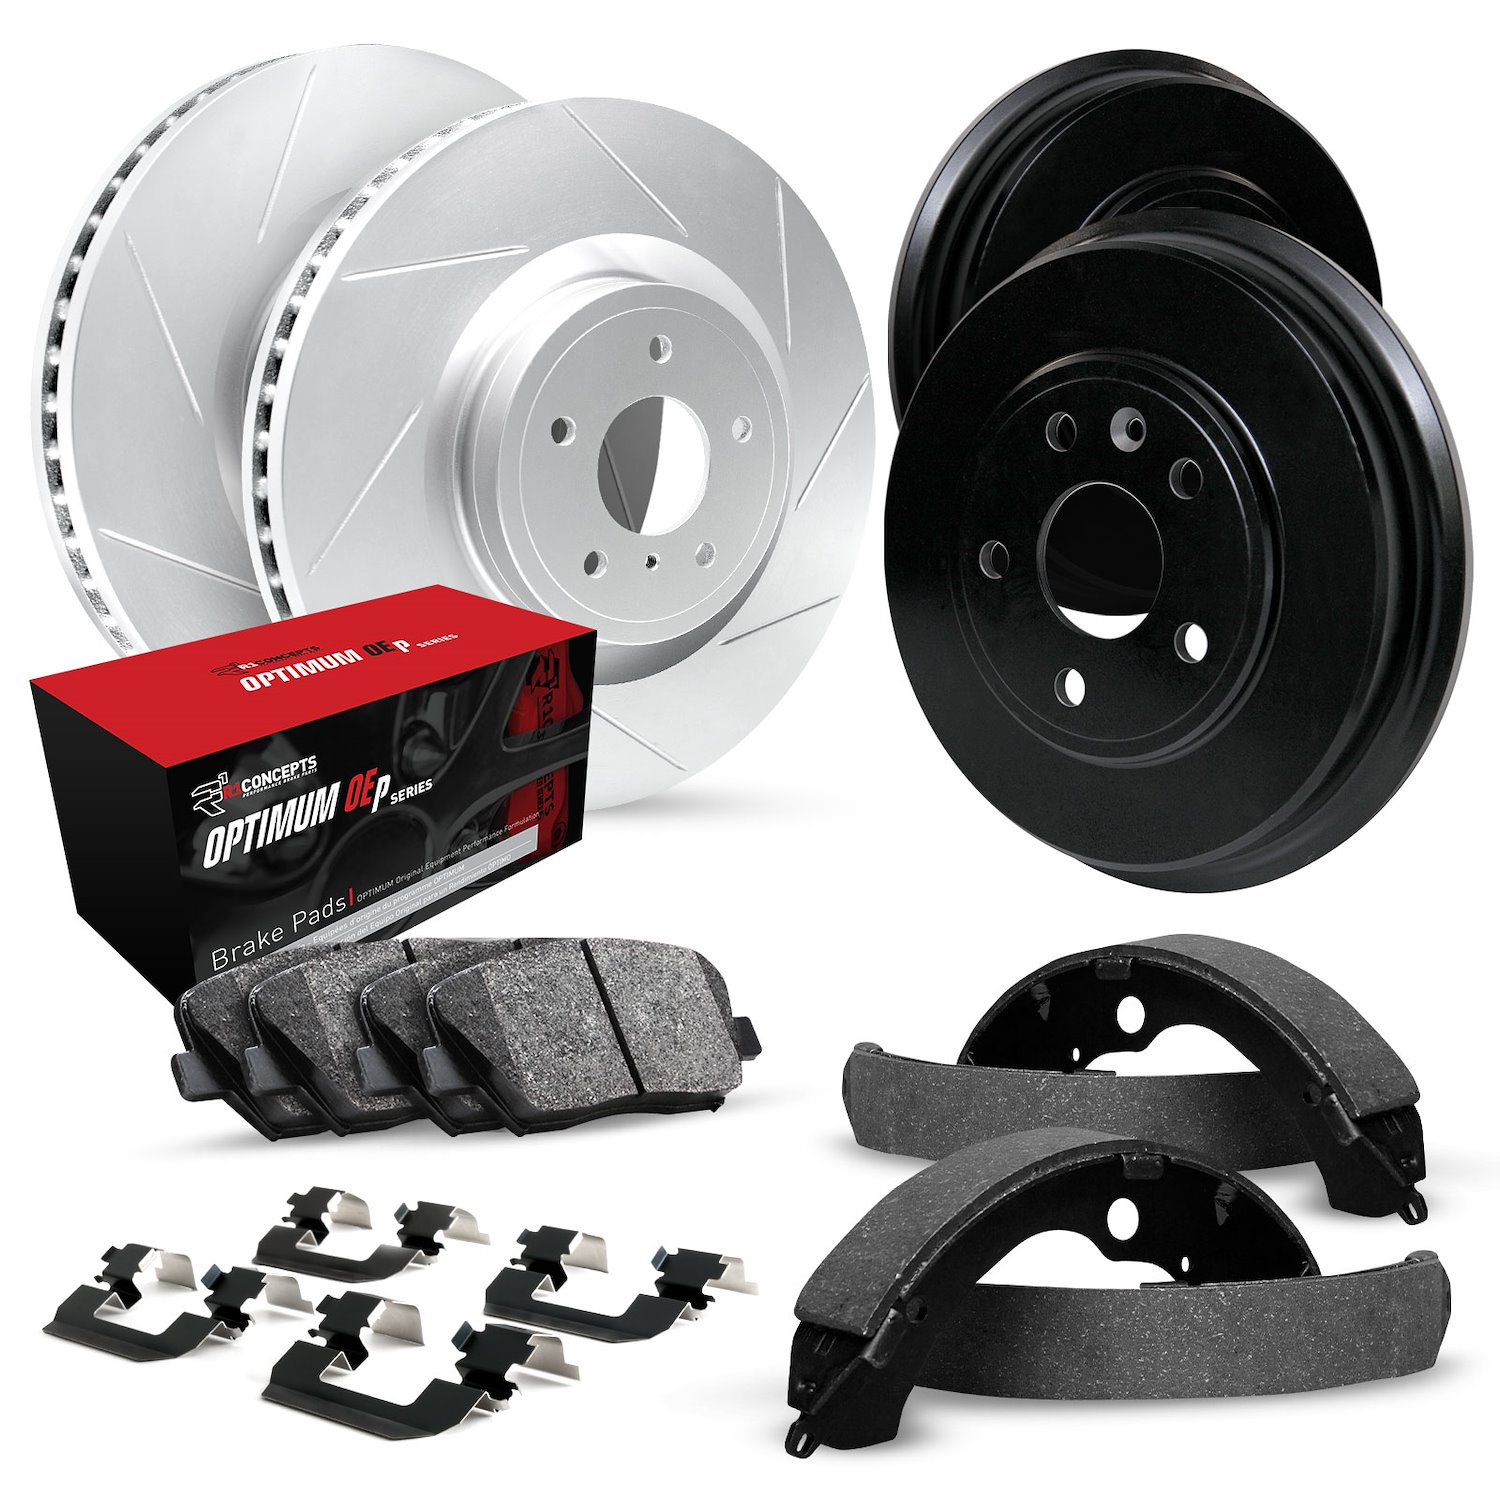 GEO-Carbon Slotted Brake Rotor & Drum Set w/Optimum OE Pads, Shoes, & Hardware, 1971-1971 GM, Position: Front & Rear